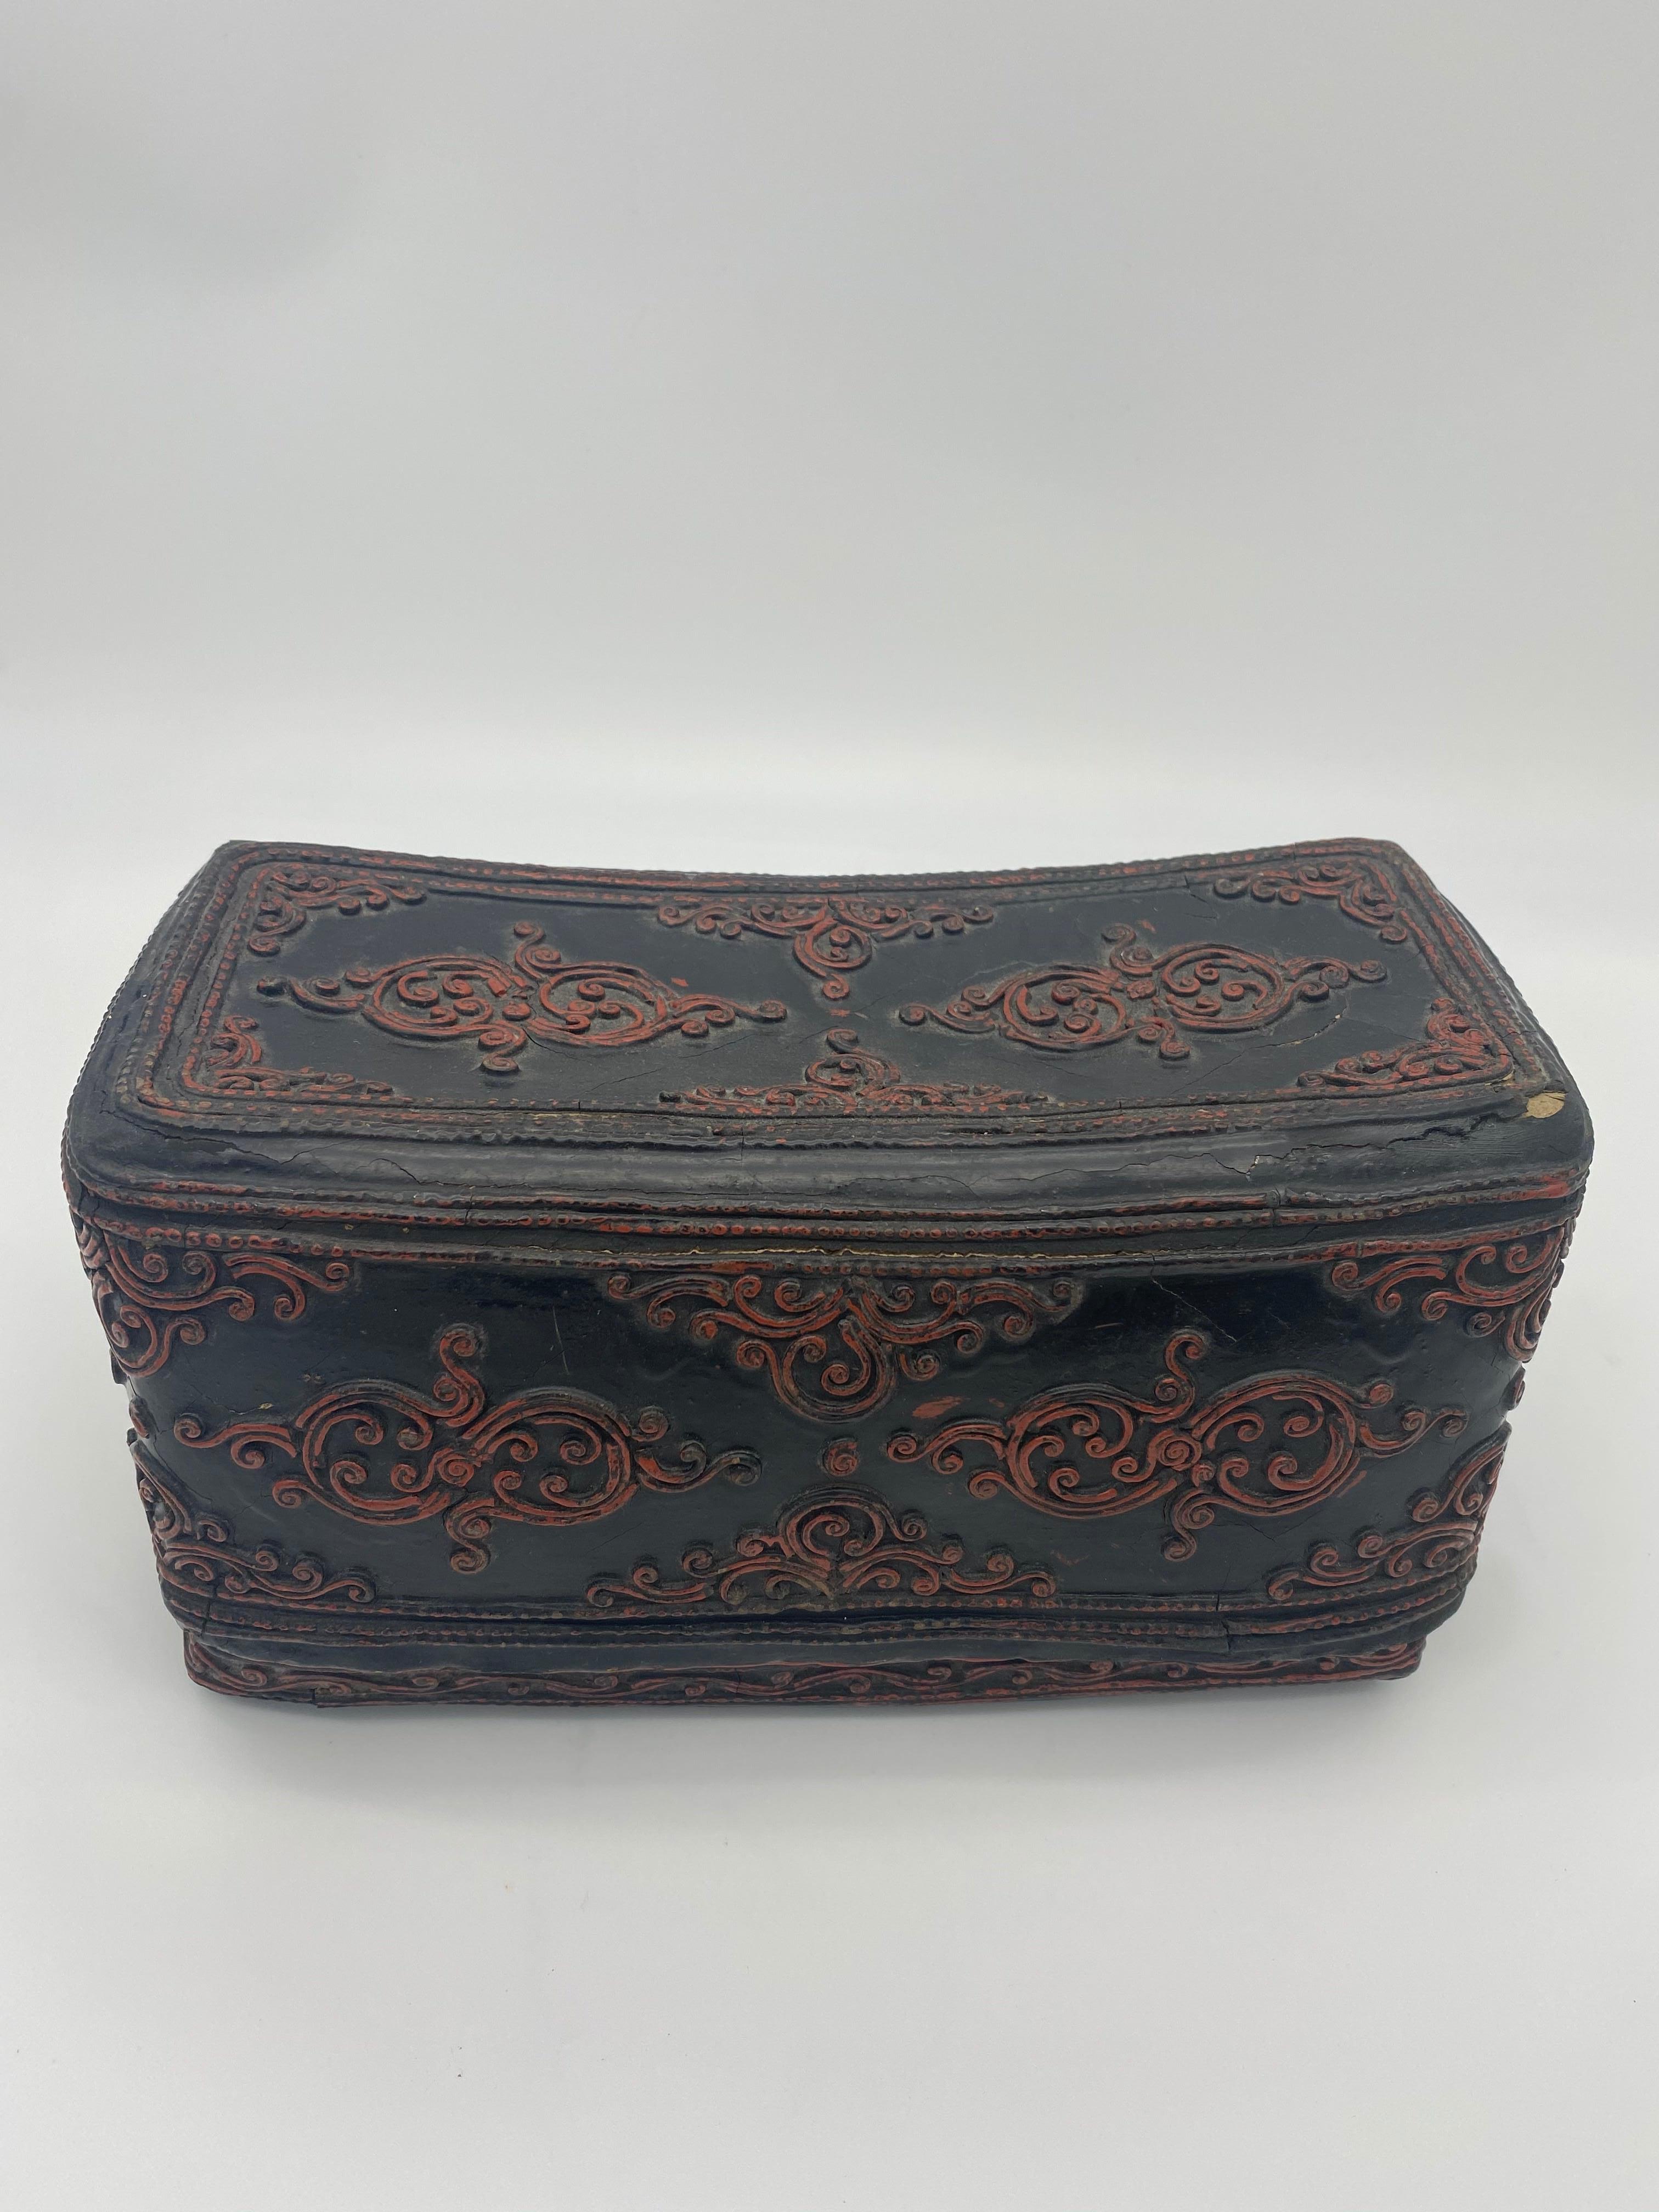 18th century Burmese black bamboo pillow box in relief with red Rakhine lacquer. Created with bamboo weaving. Decorated all-over with geometrical shapes and designs. See image for more detail.